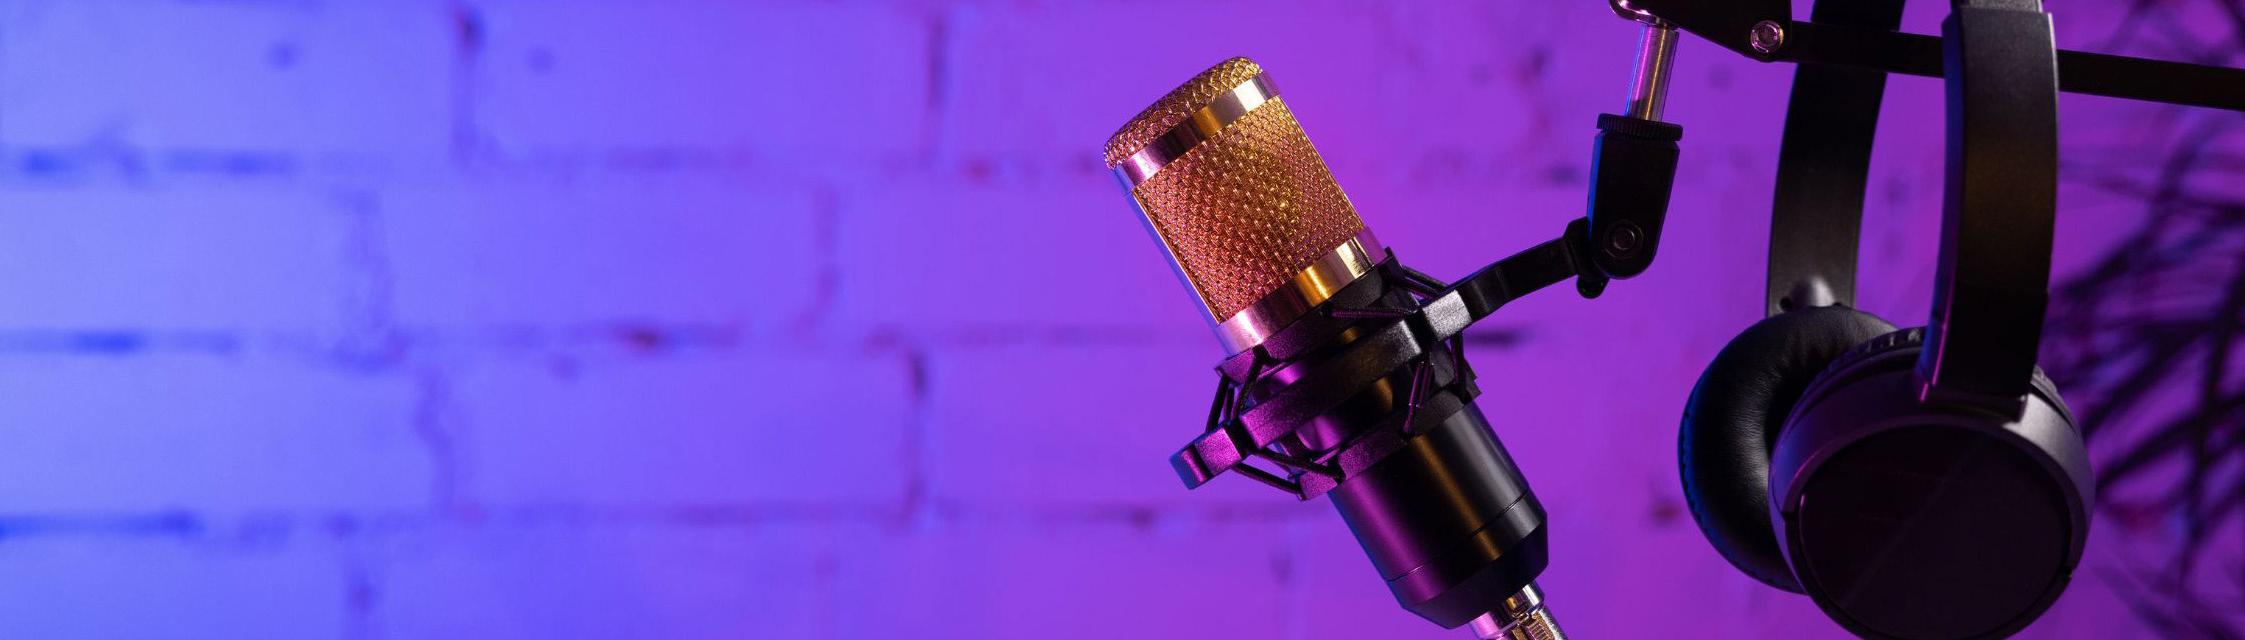 Headphones hang on a microphone stand with a purple and blue wall in the background